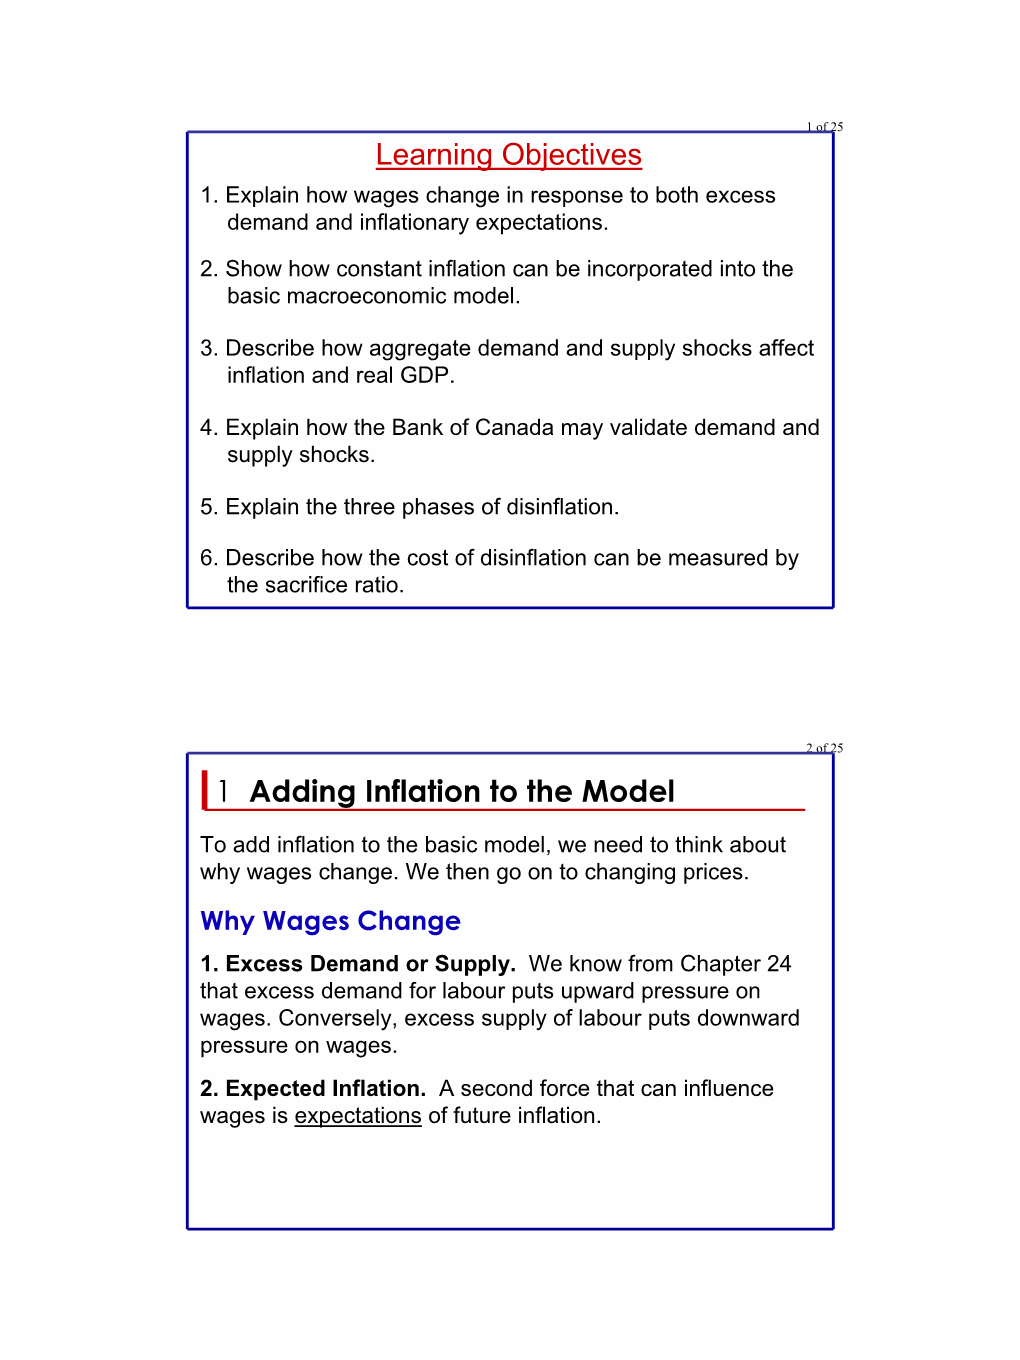 Learning Objectives 1 Adding Inflation to the Model